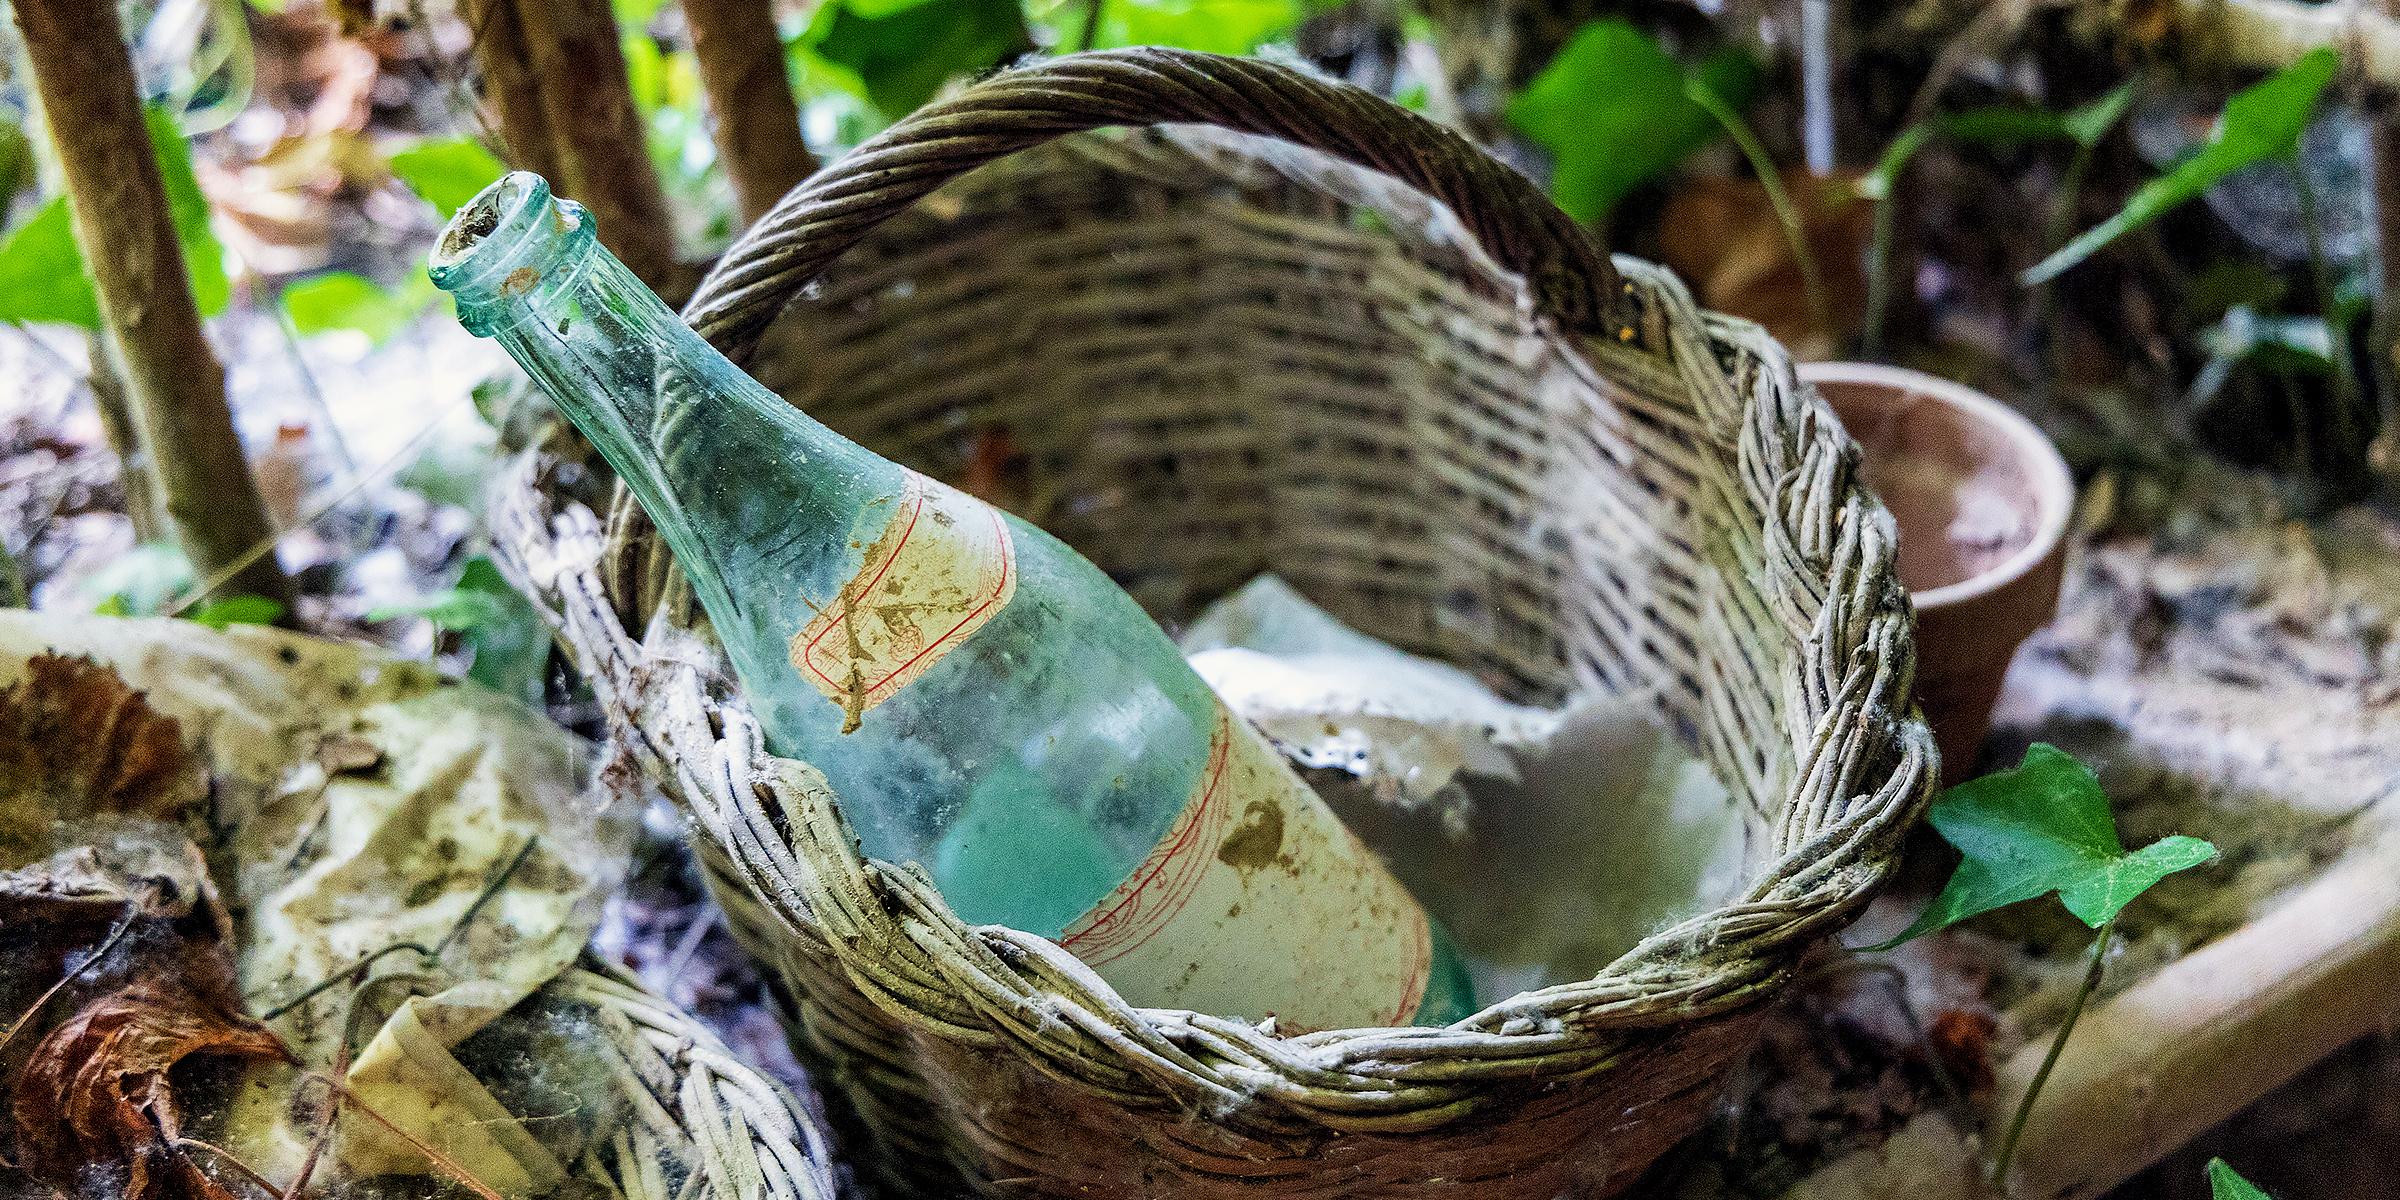 An old glass bottle in a basket | Source: Getty Images